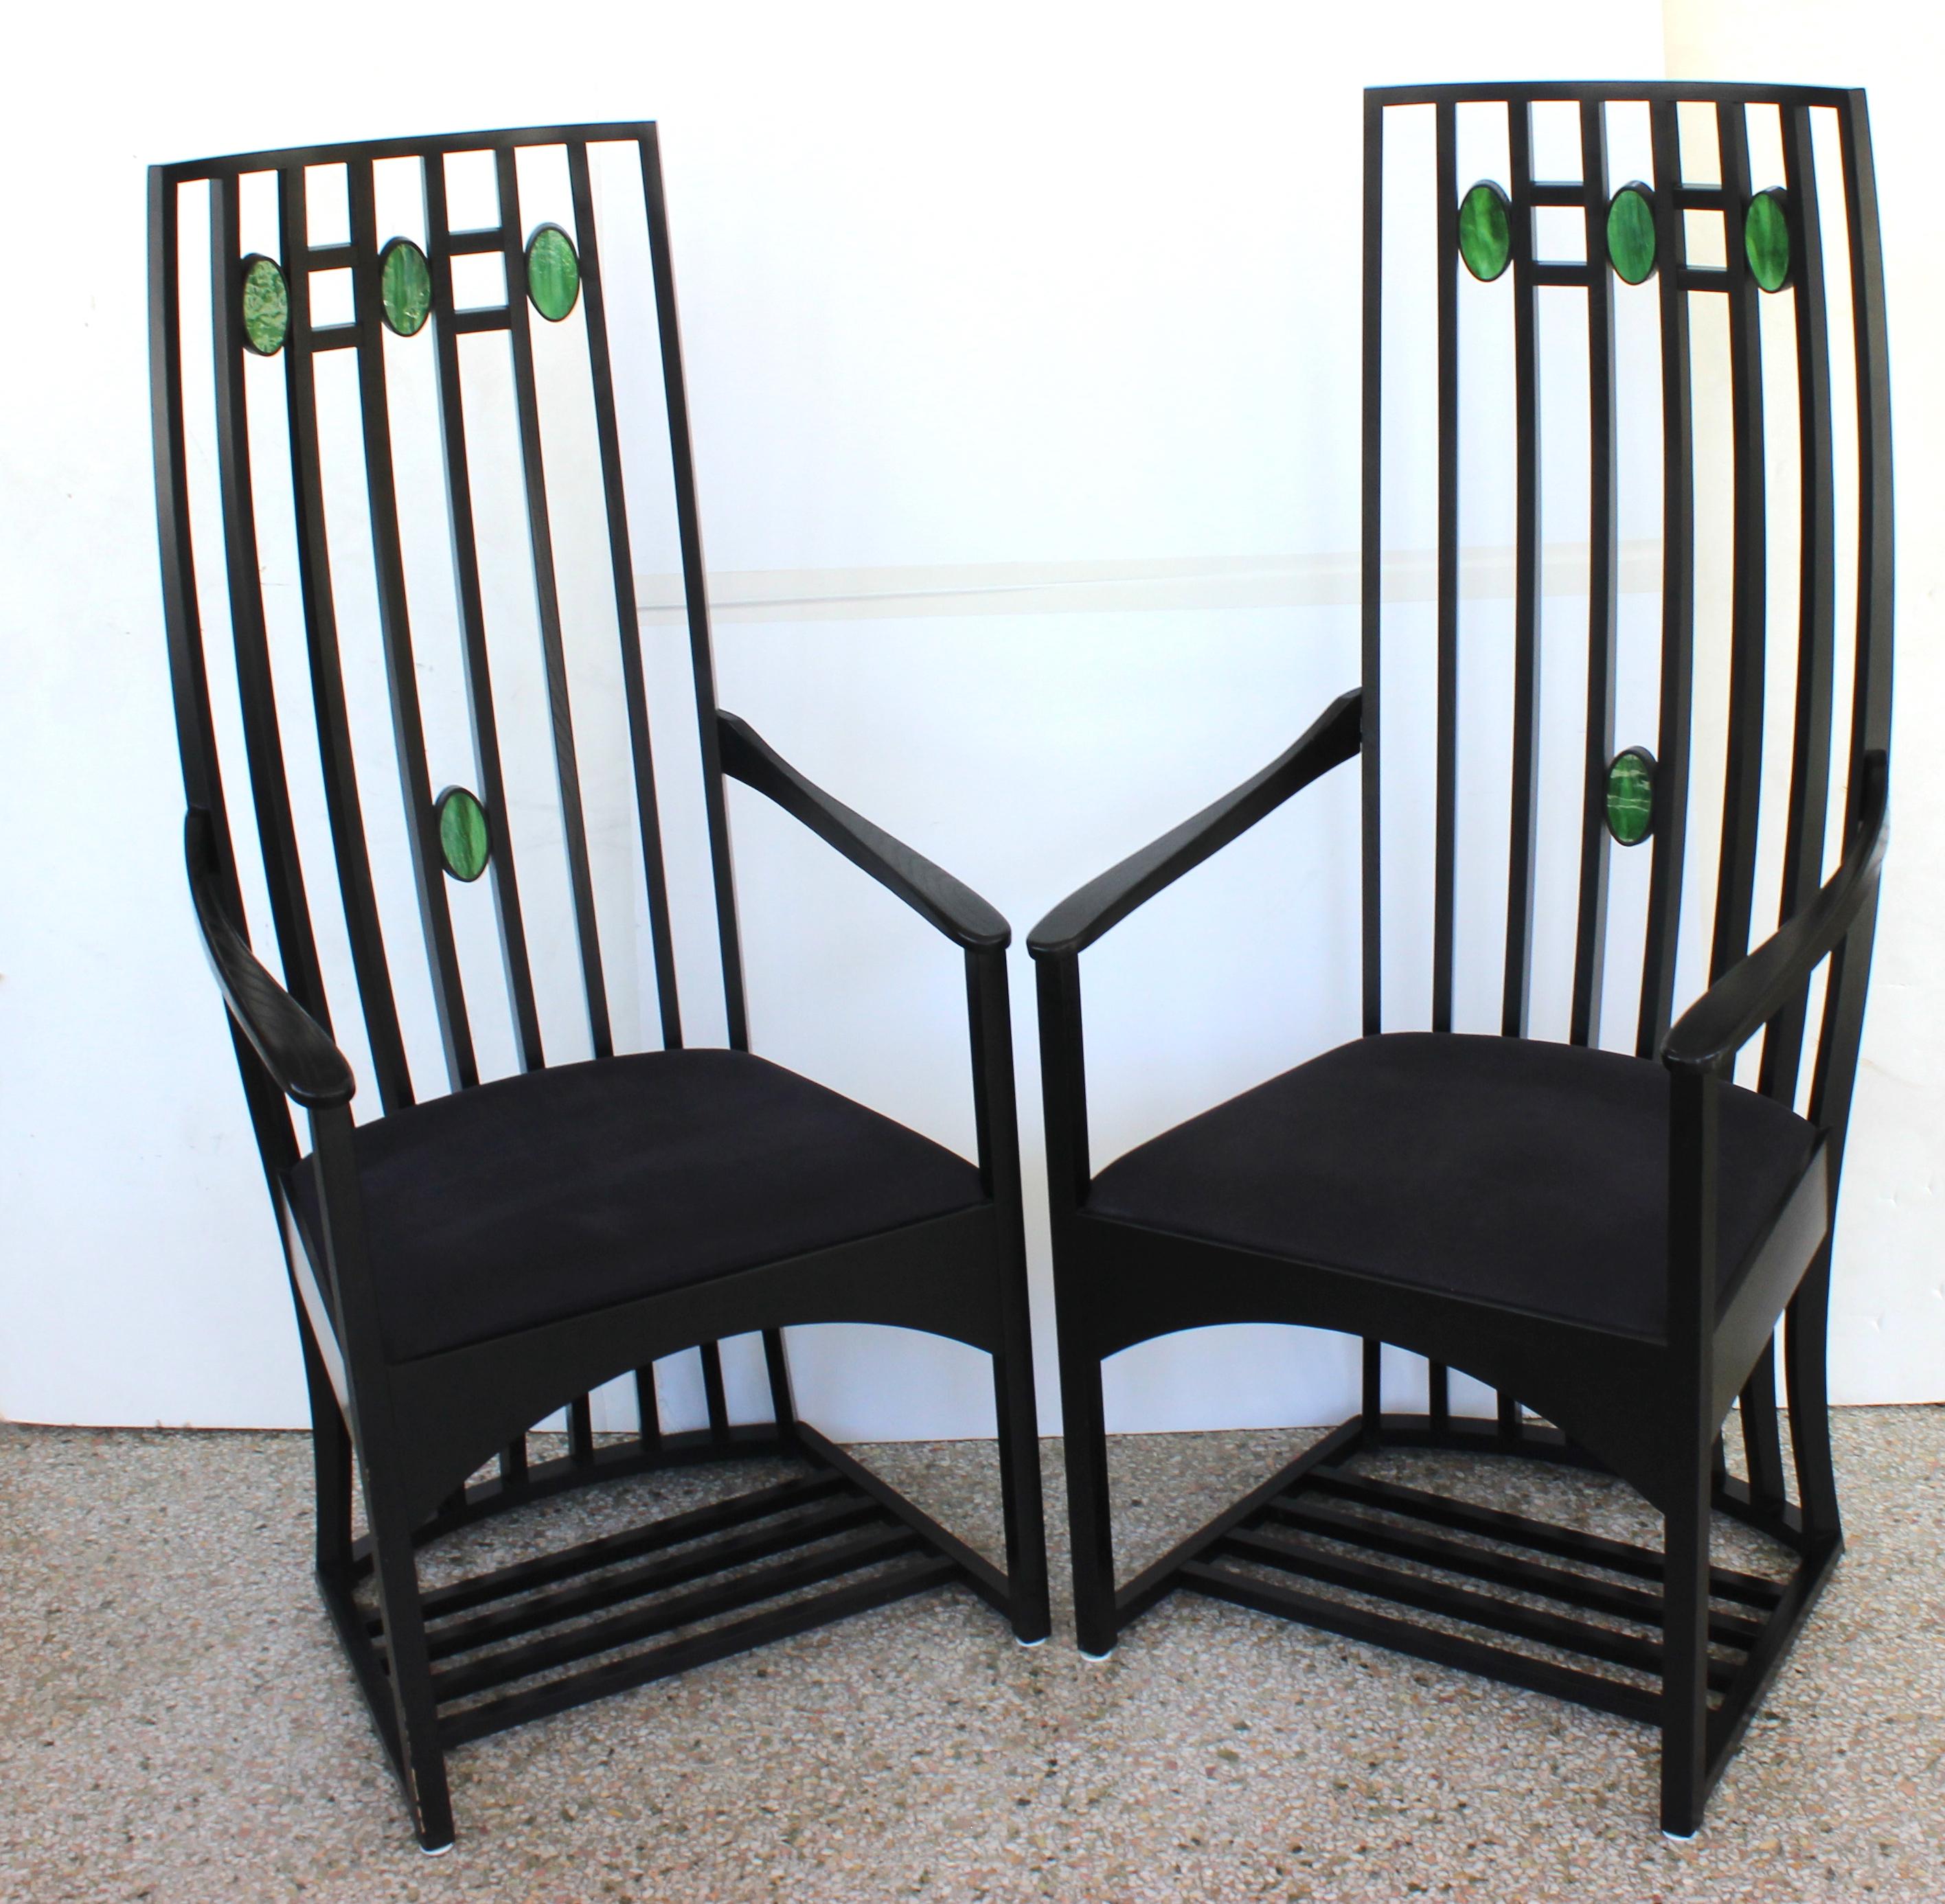 These stylish and chic ebonized arm chair takes their form and use of materials from a chair designed in 1904 by Charles Rennie Mackintosh. The actual chair(s) designed and fabricated by Mackintosh was for Catherine Cranston of Glasgow, and the